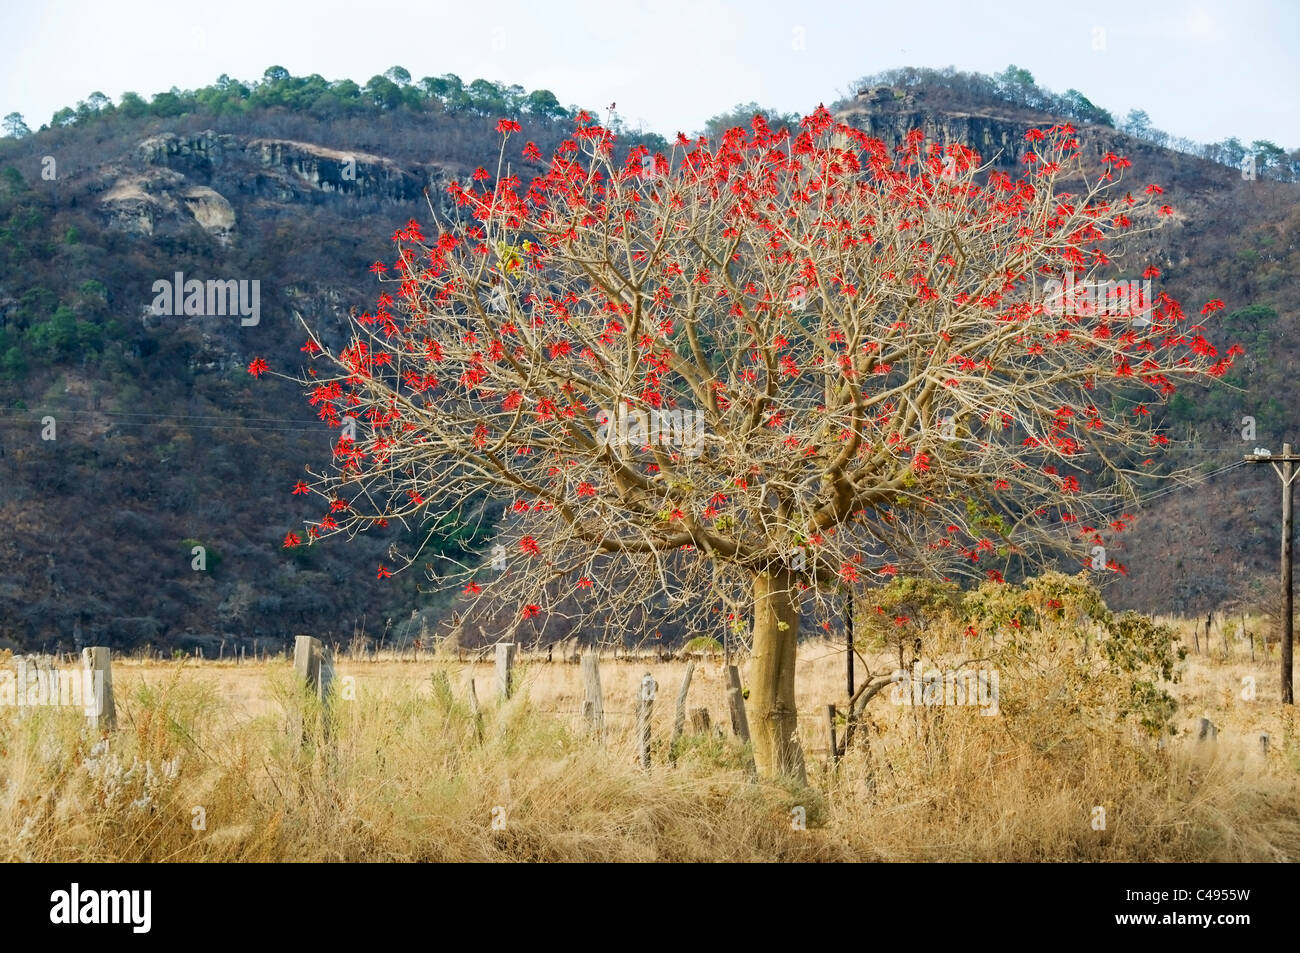 A beautiful Erythrina 'coral tree' in full bloom on the outskirts of Mascota, in the Mexican state of Jalisco. Stock Photo